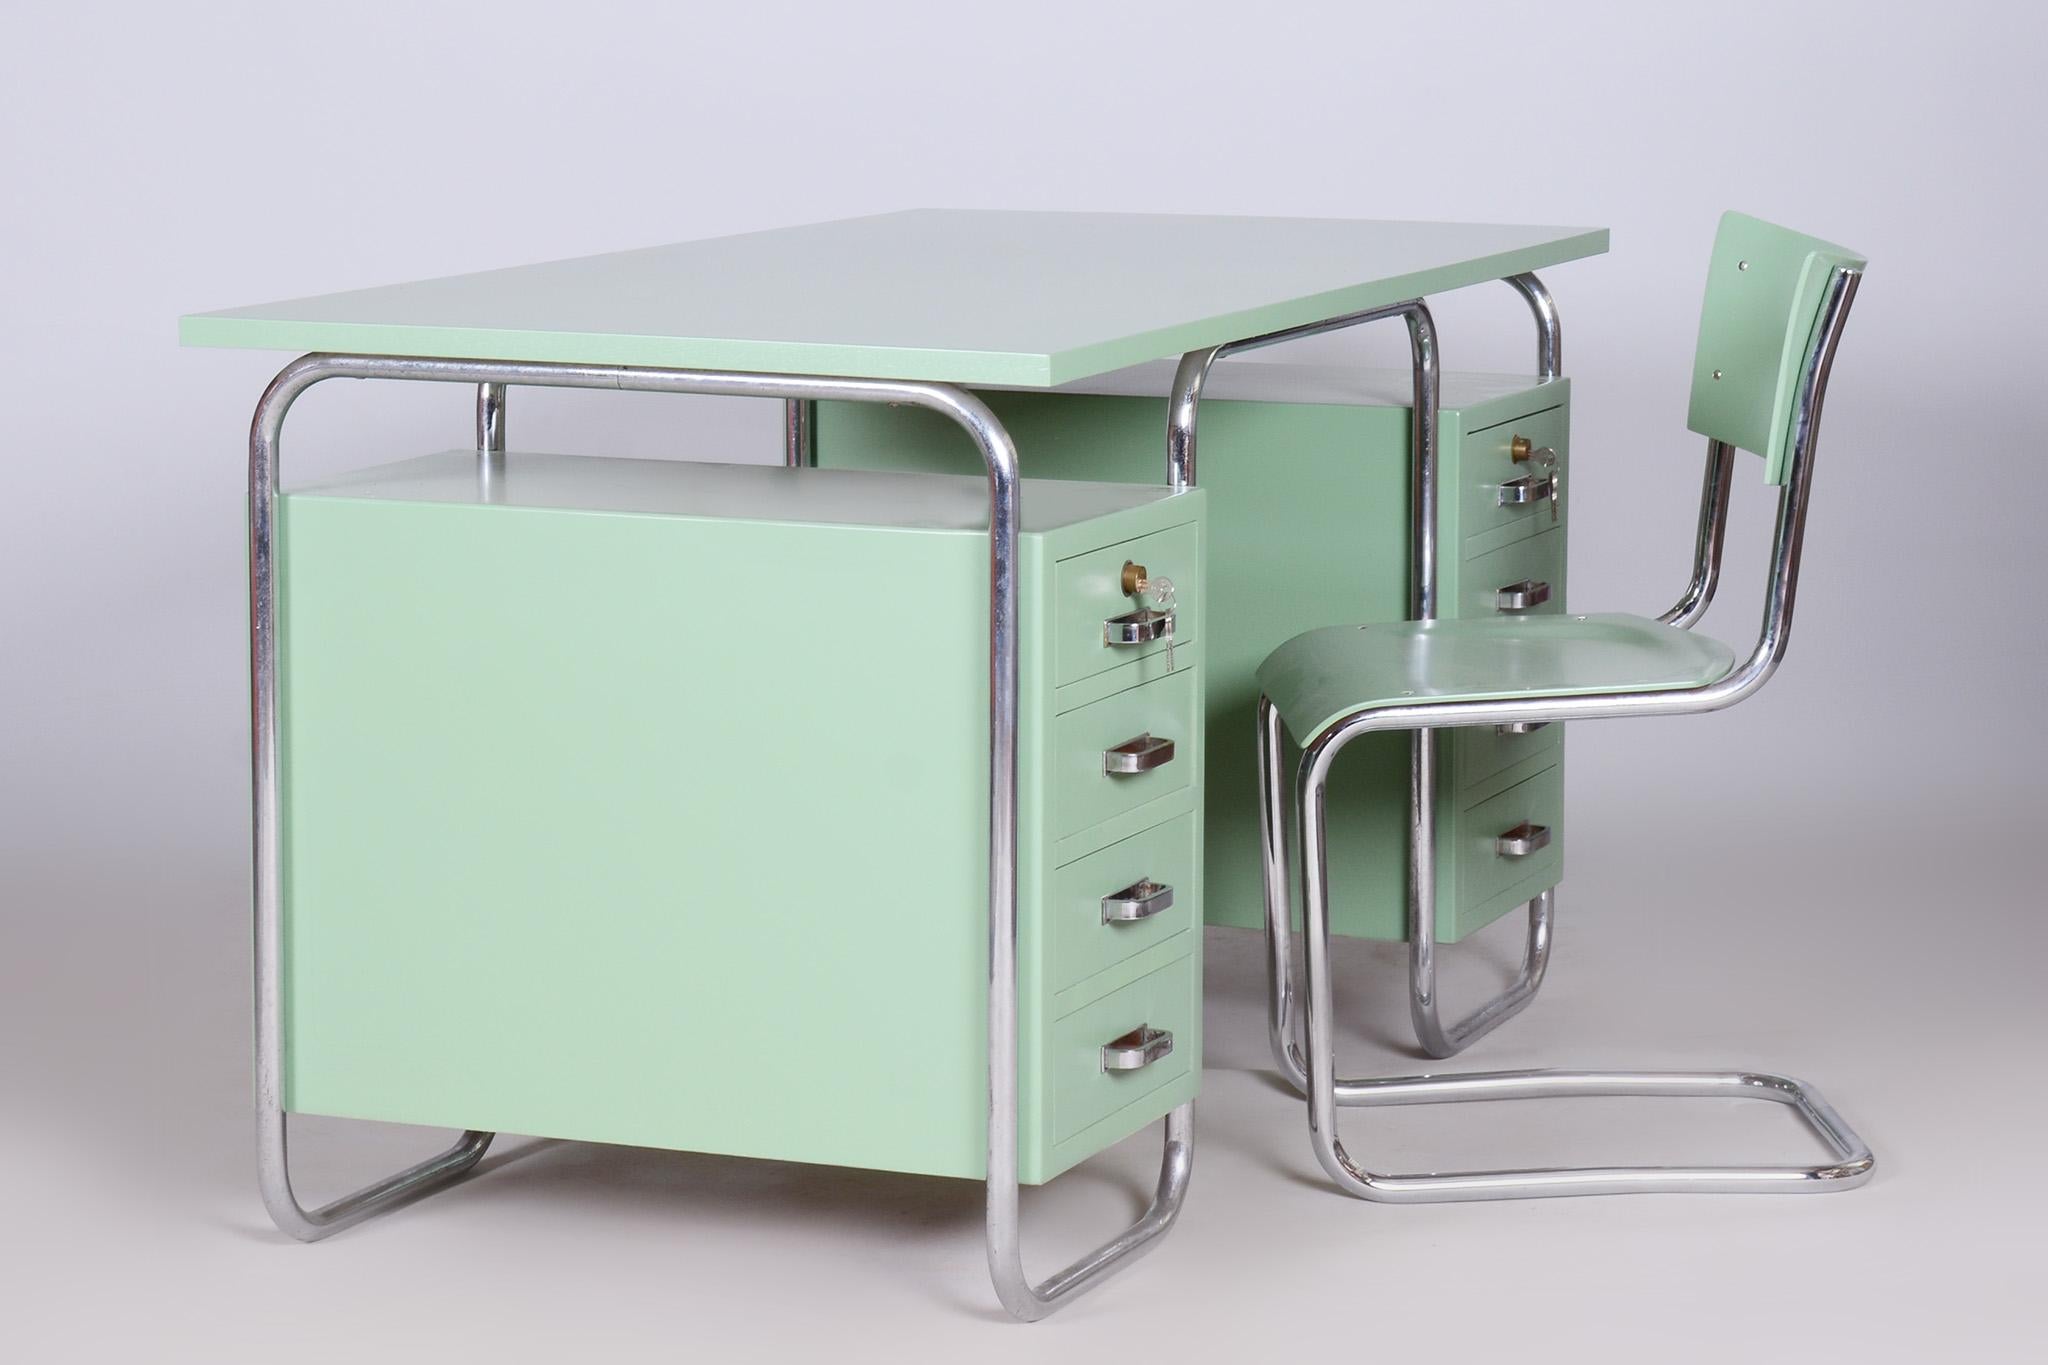 Bauhaus Writing Desk and Chair, Thonet, Chrome-Plated Steel, Czechia, 1930s For Sale 9